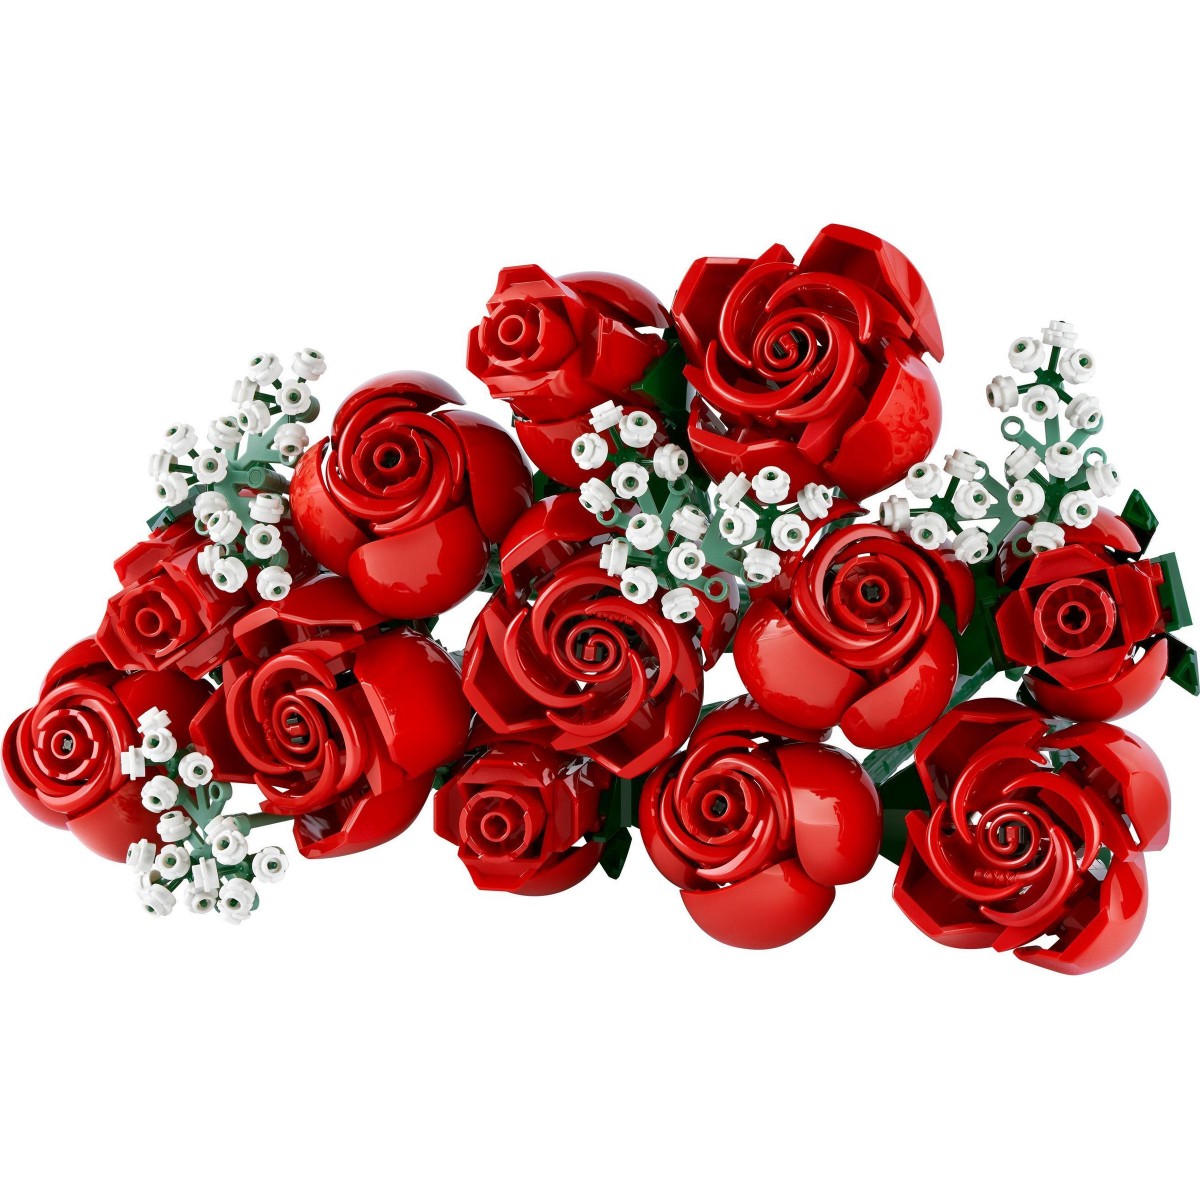 LEGO Icons Flower Bouquet Building Decoration Set - Artificial Flowers with  Roses, Home Accessories or Valentine Décor for Him and Her, Gift for